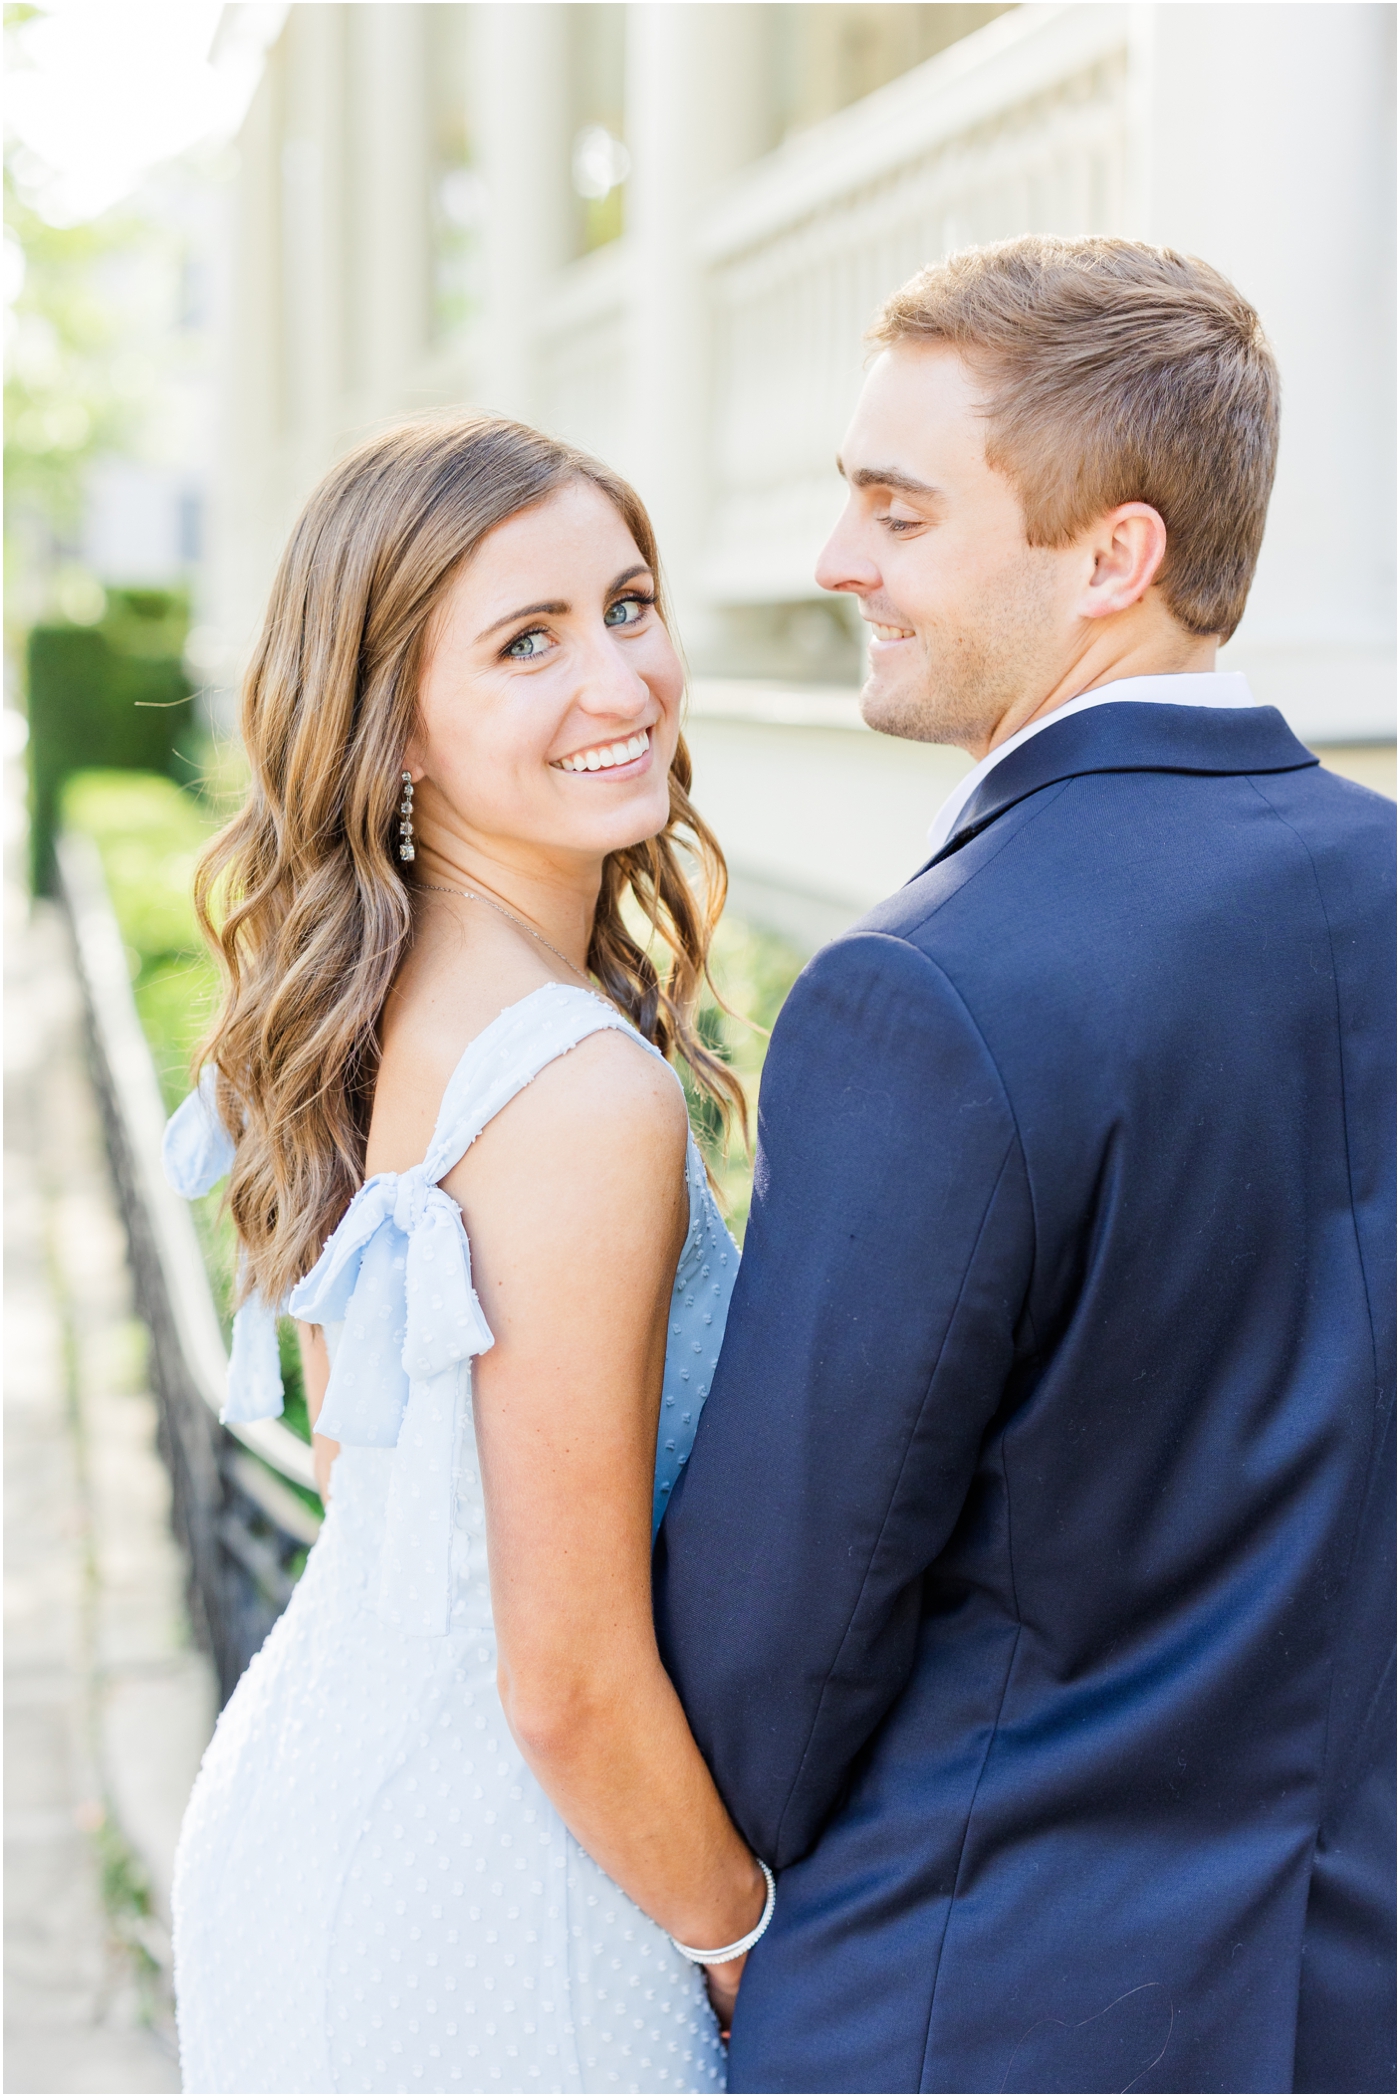 Downtown Charleston engagement session